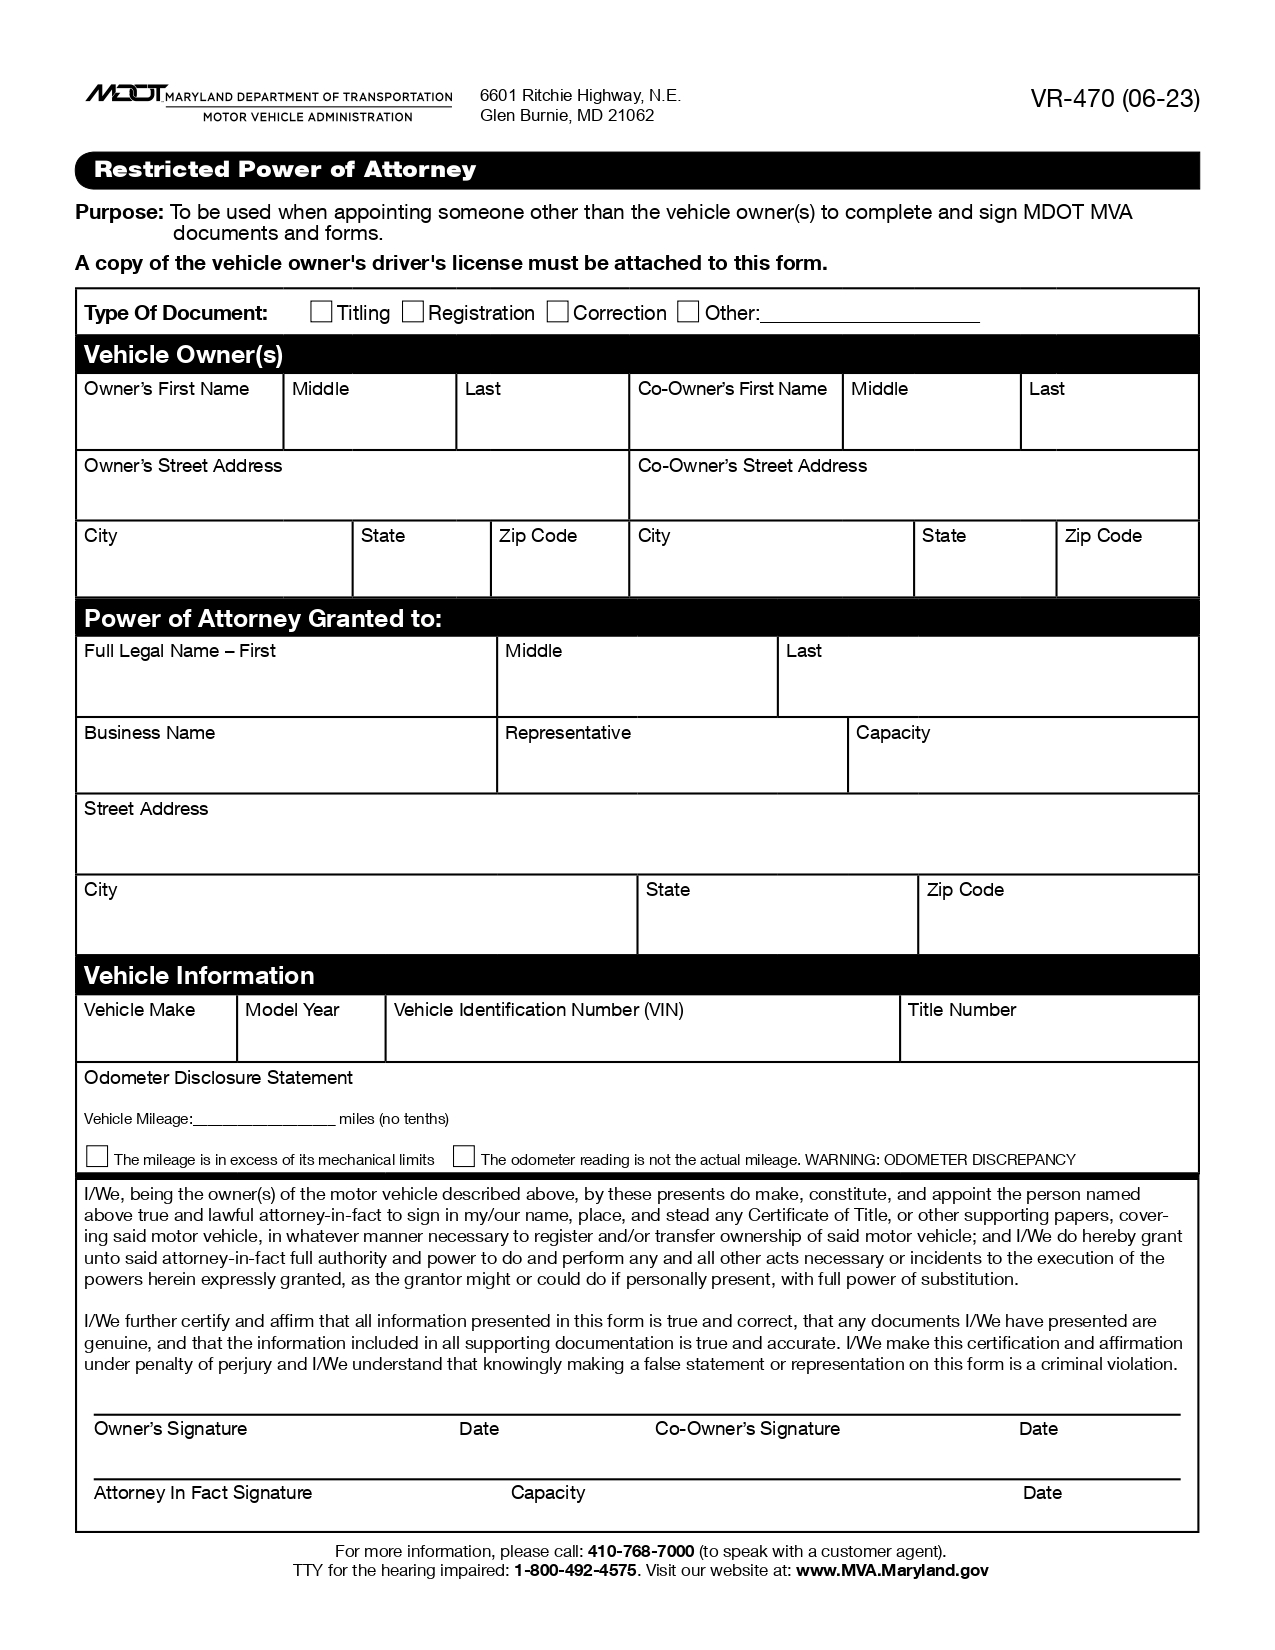 Maryland Motor Vehicle Power of Attorney Form (VR-470)